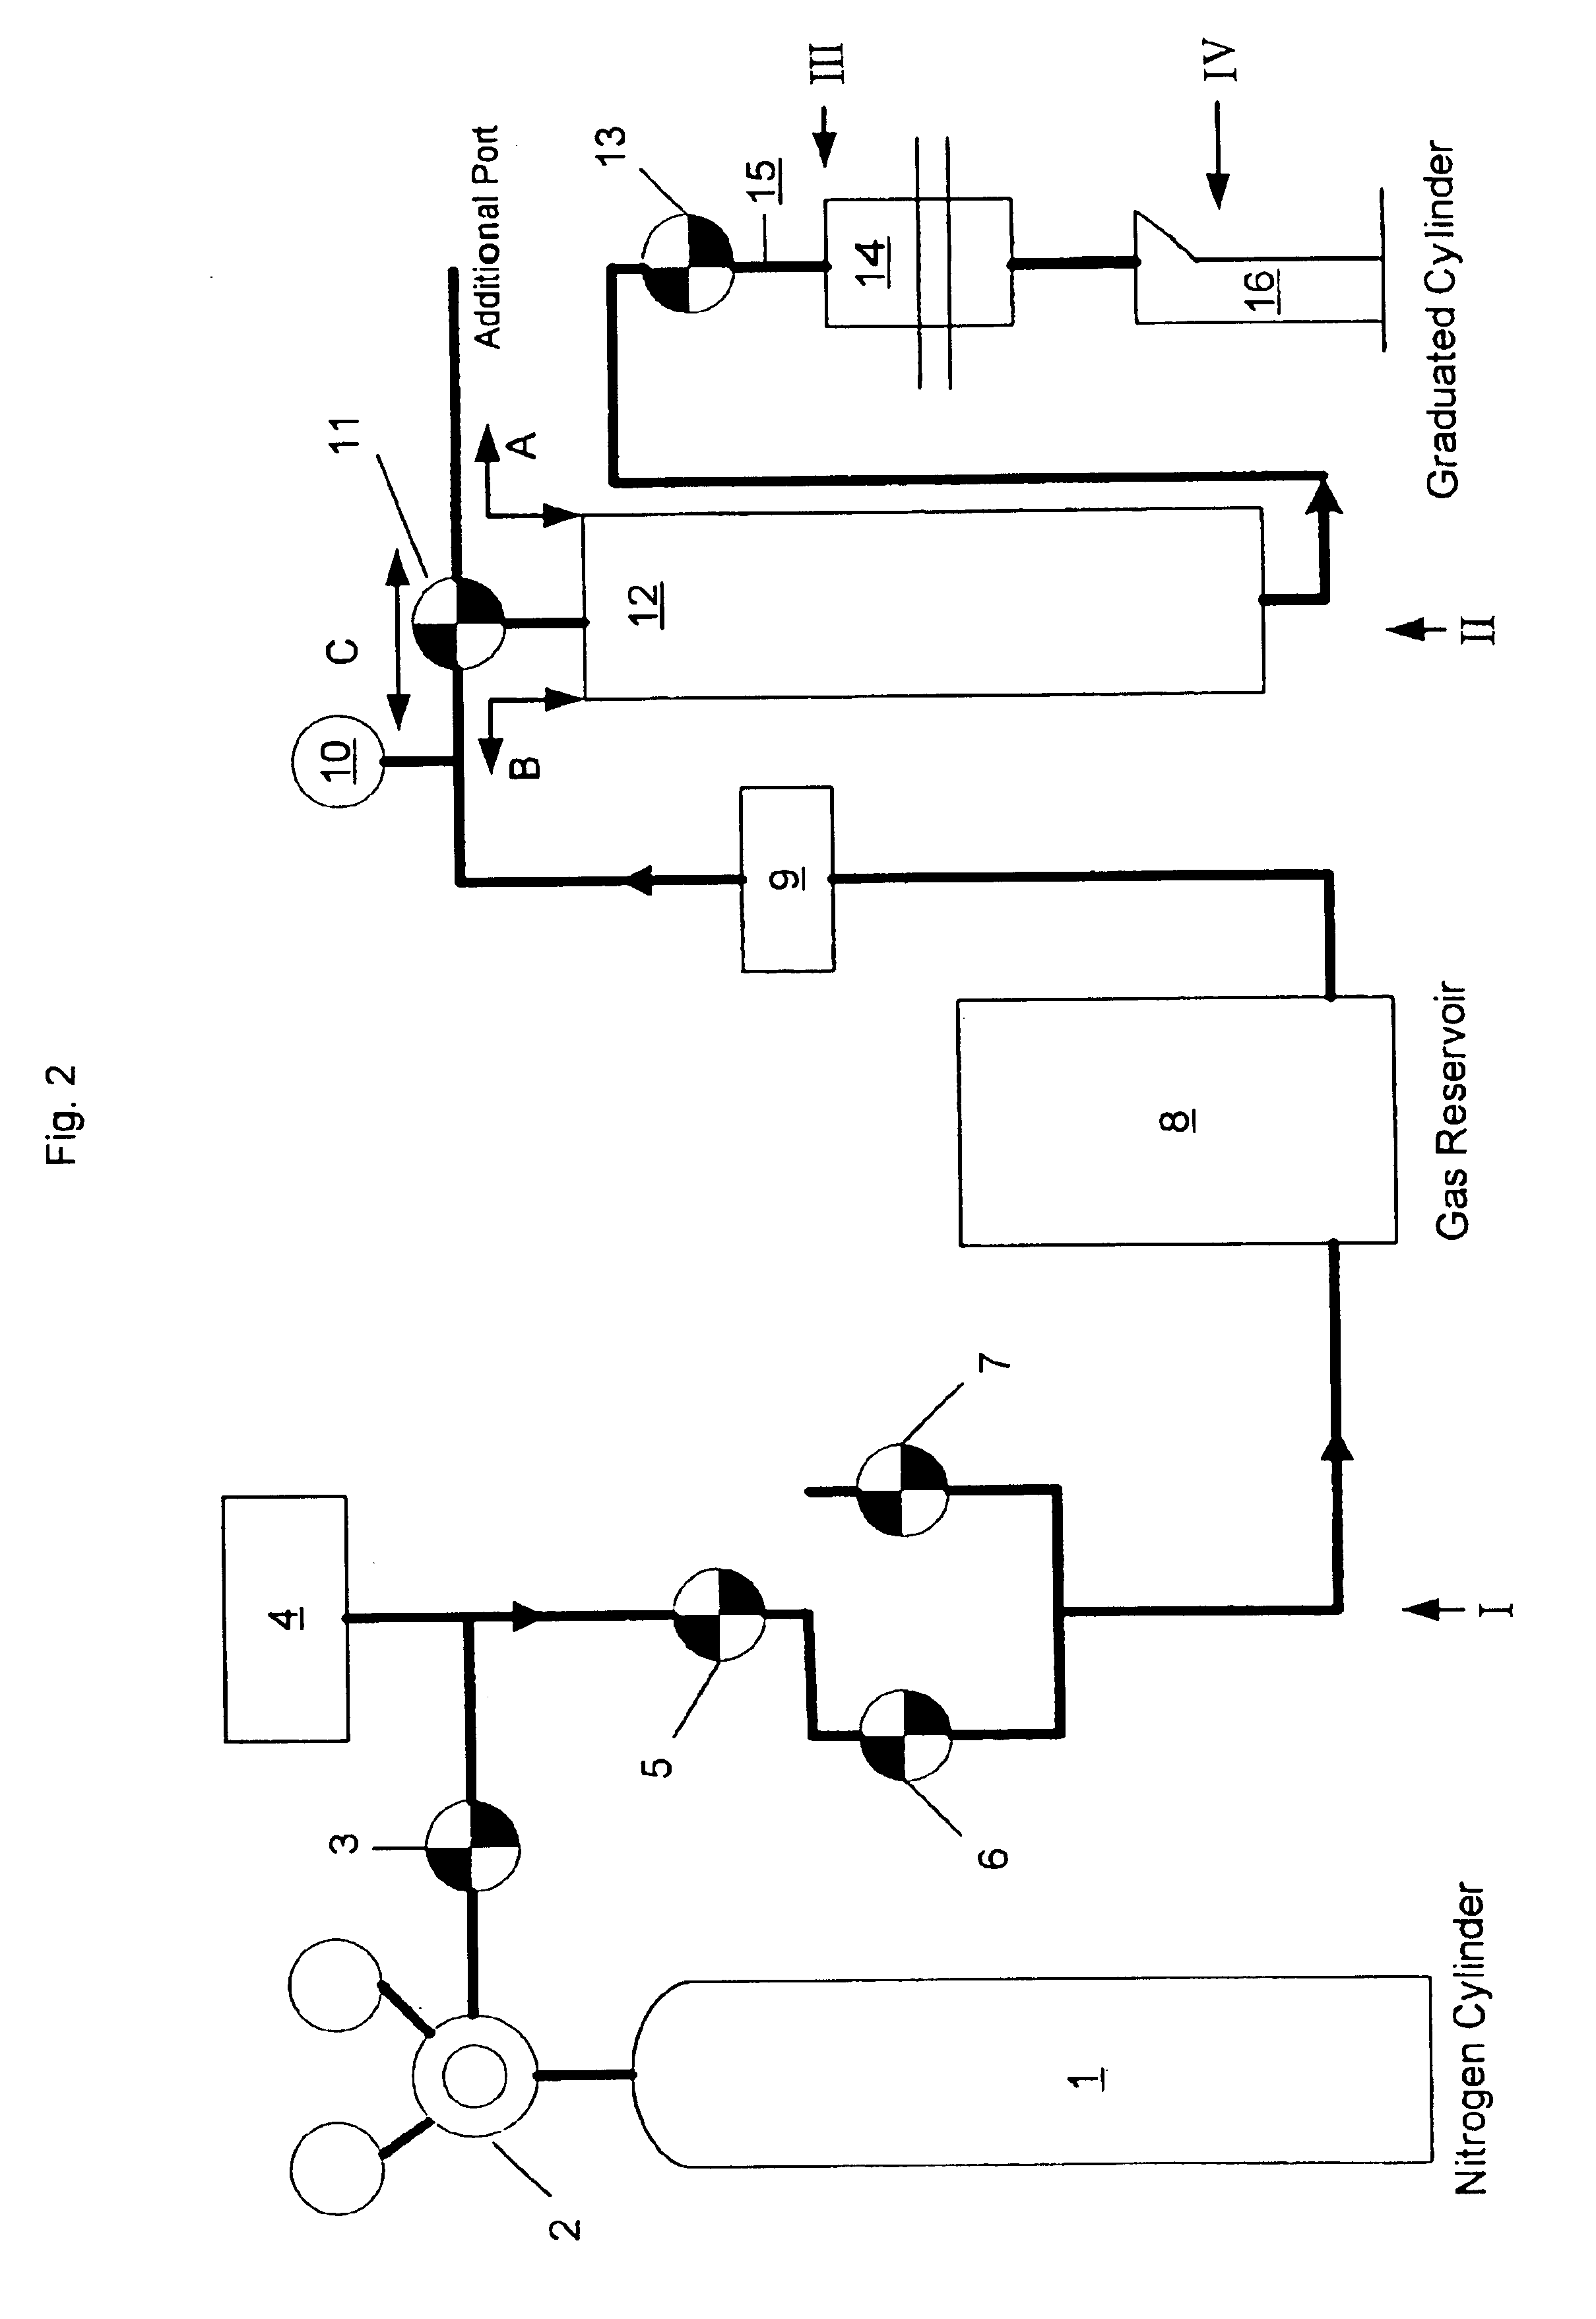 Enhanced efficacy basic aluminum halides, antiperspirant active compositions and methods for making